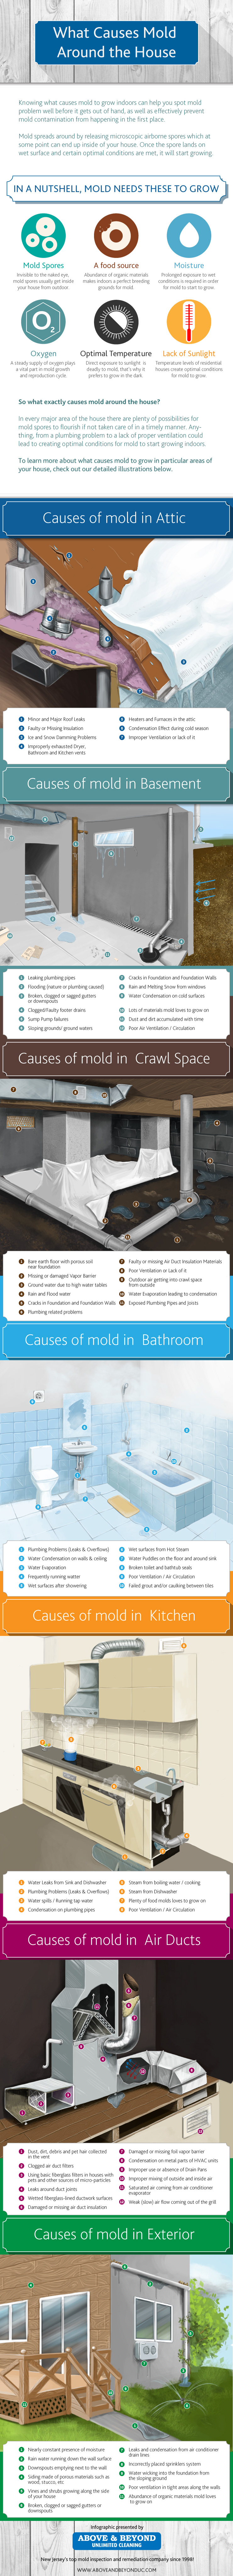 What causes mold around the house - Inforaphic